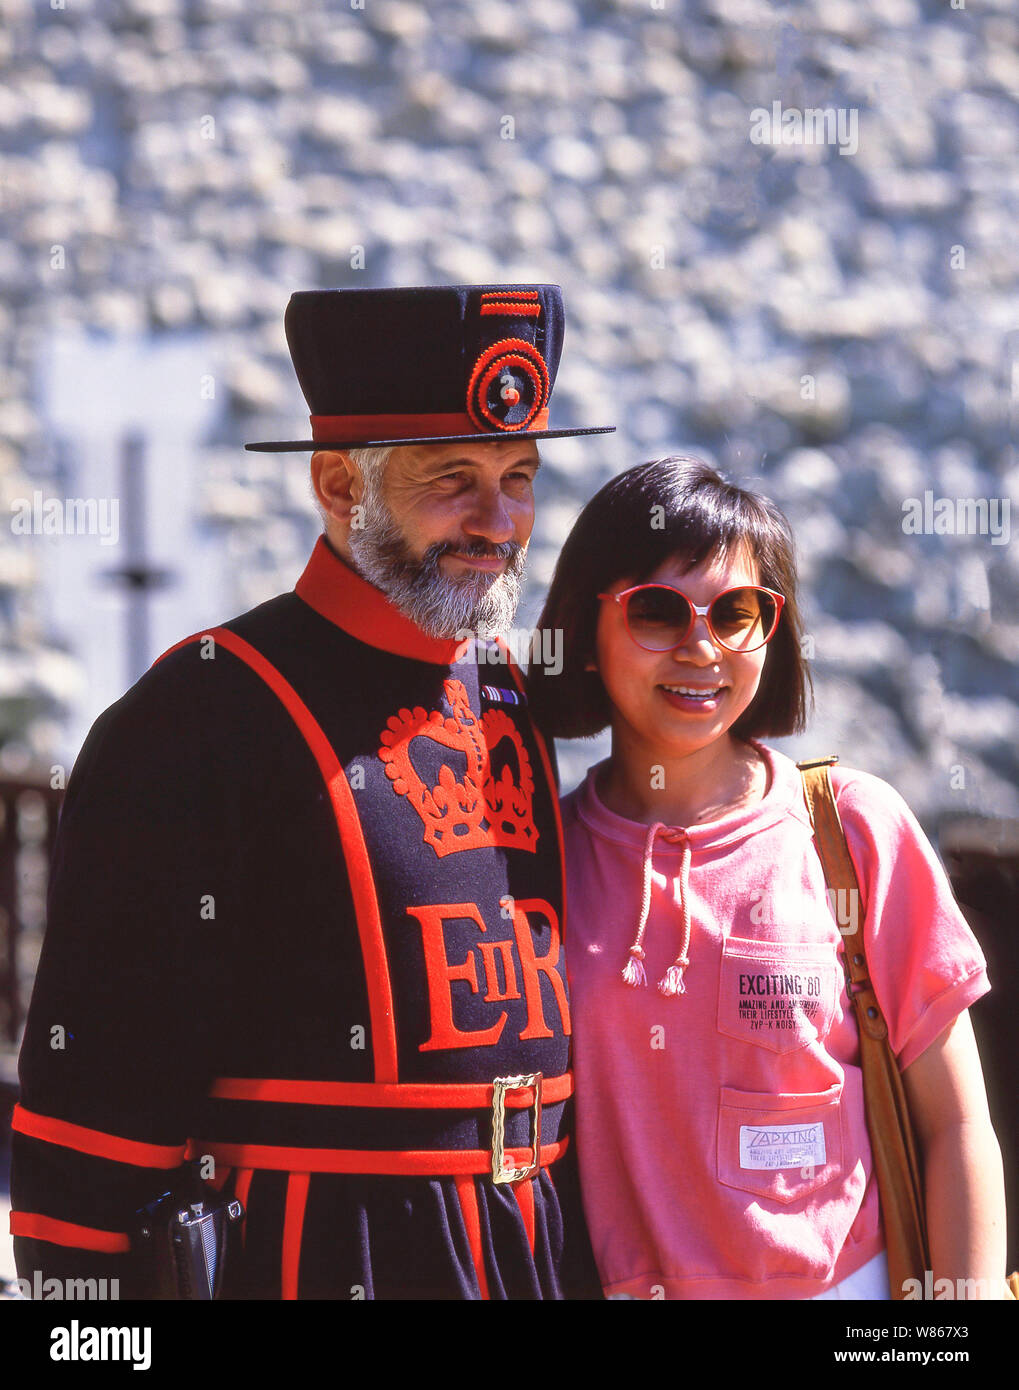 Beefeater (Yeomen Warder) mit Asian Tourist, Tower of London, Tower Hill, The Borough of Tower Hamlets, Greater London, England, Großbritannien Stockfoto